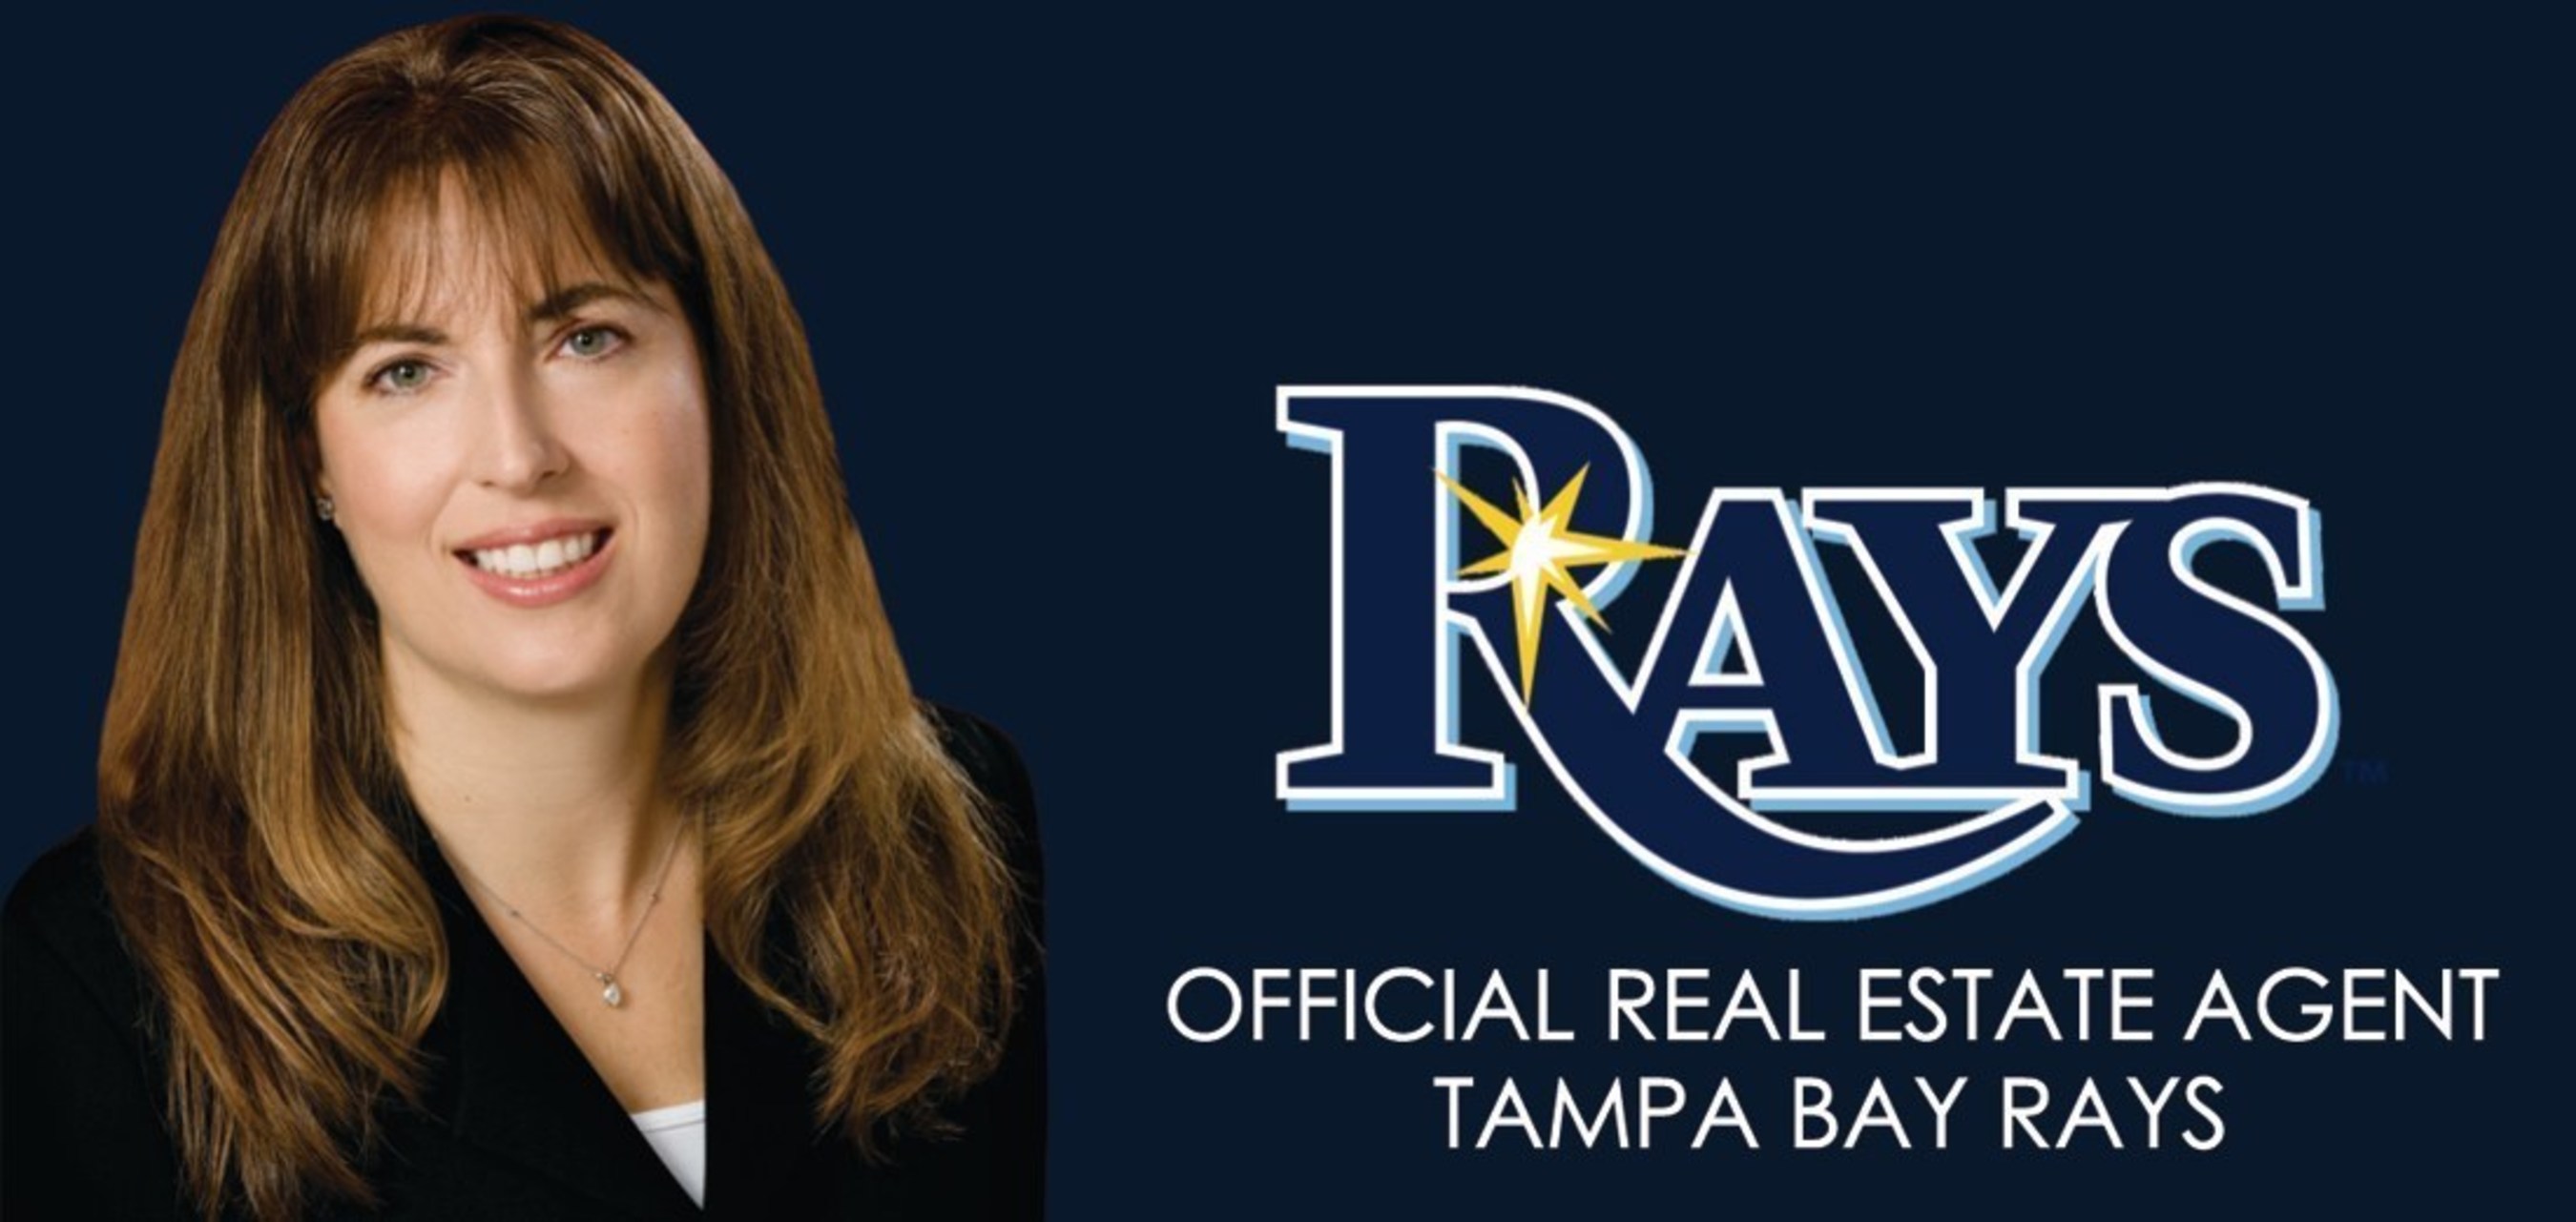 Jennifer Zales, Official Real Estate Agent of the Tampa Bay Rays